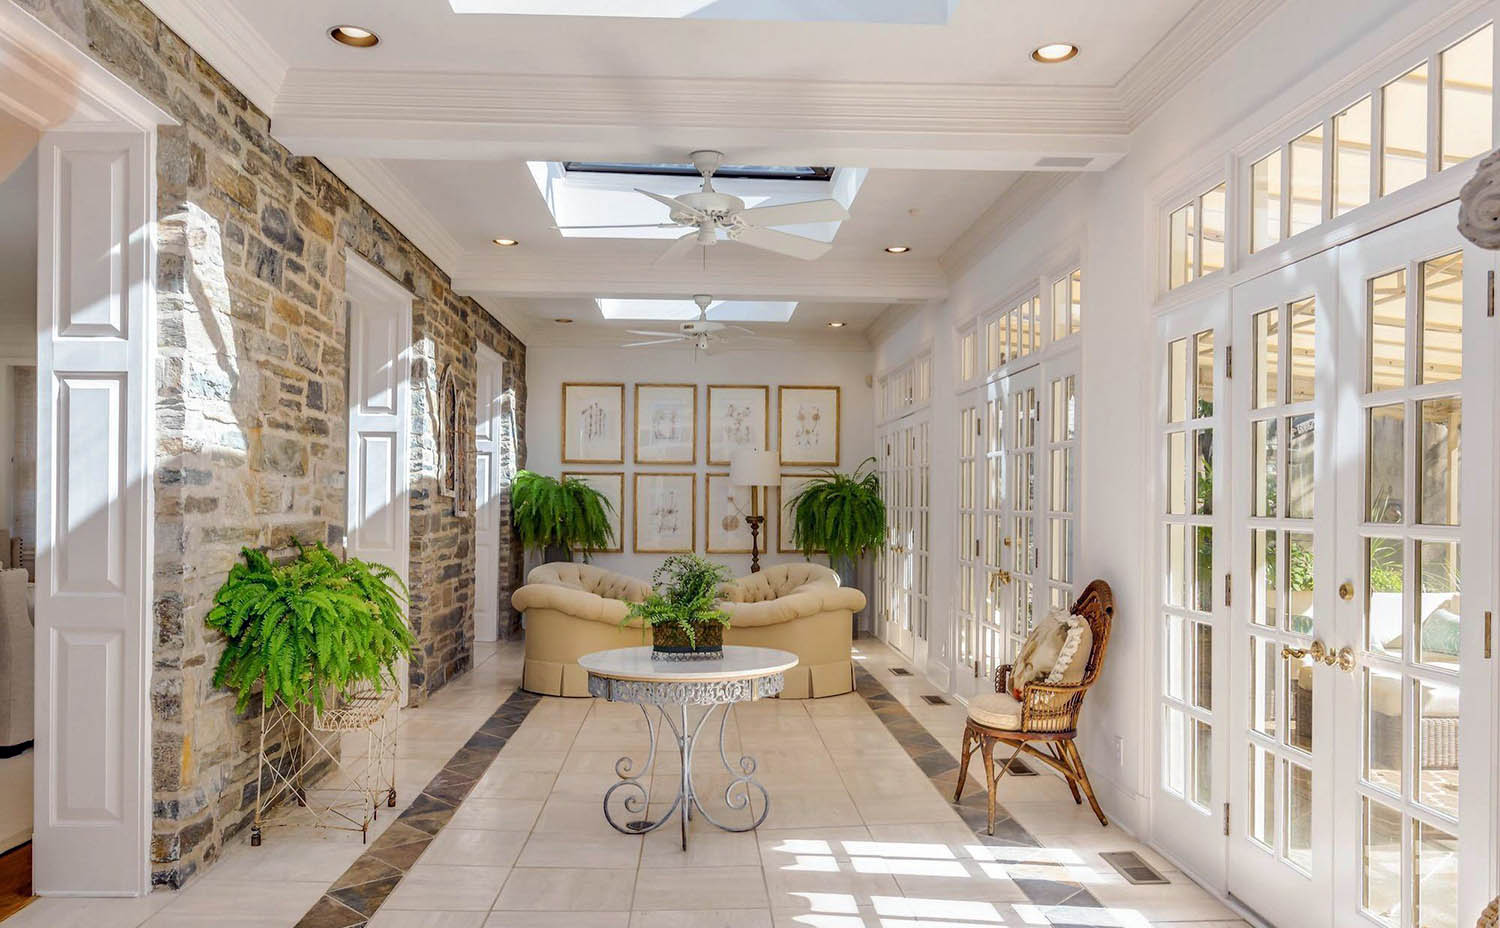 Sunroom coffered ceiling. White beams and coffers. Tile floors with inlay. White walls and ceiling. Stone veneer walls.